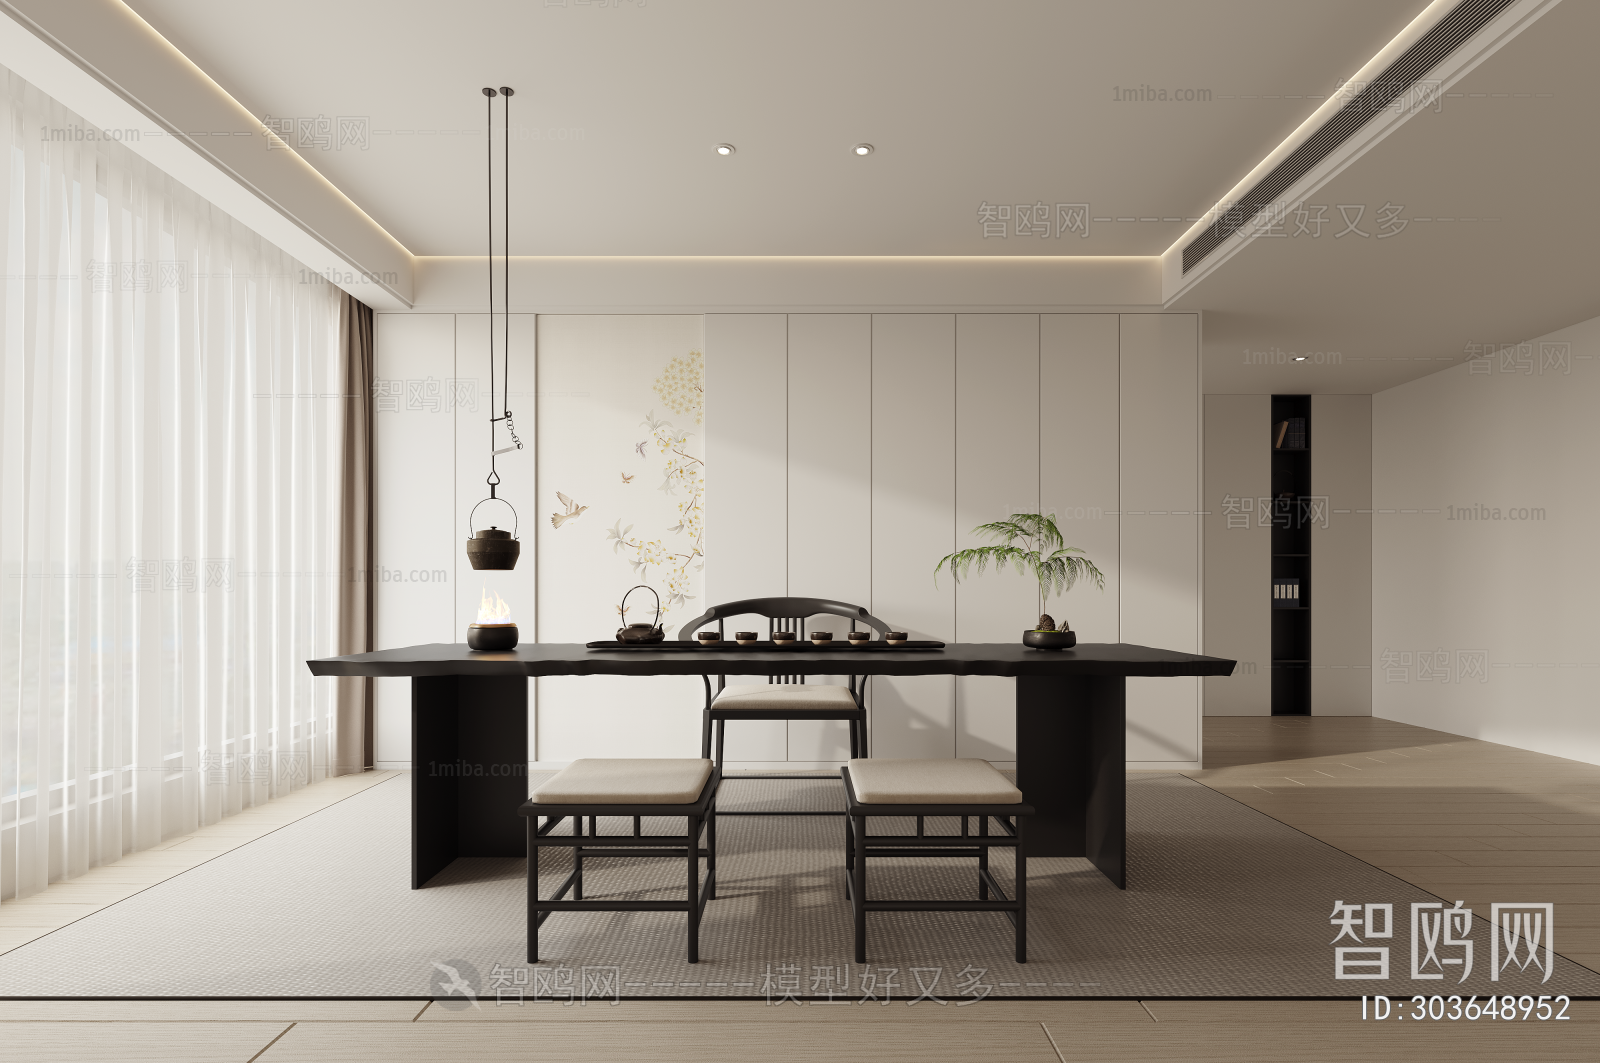 Modern New Chinese Style Tea House